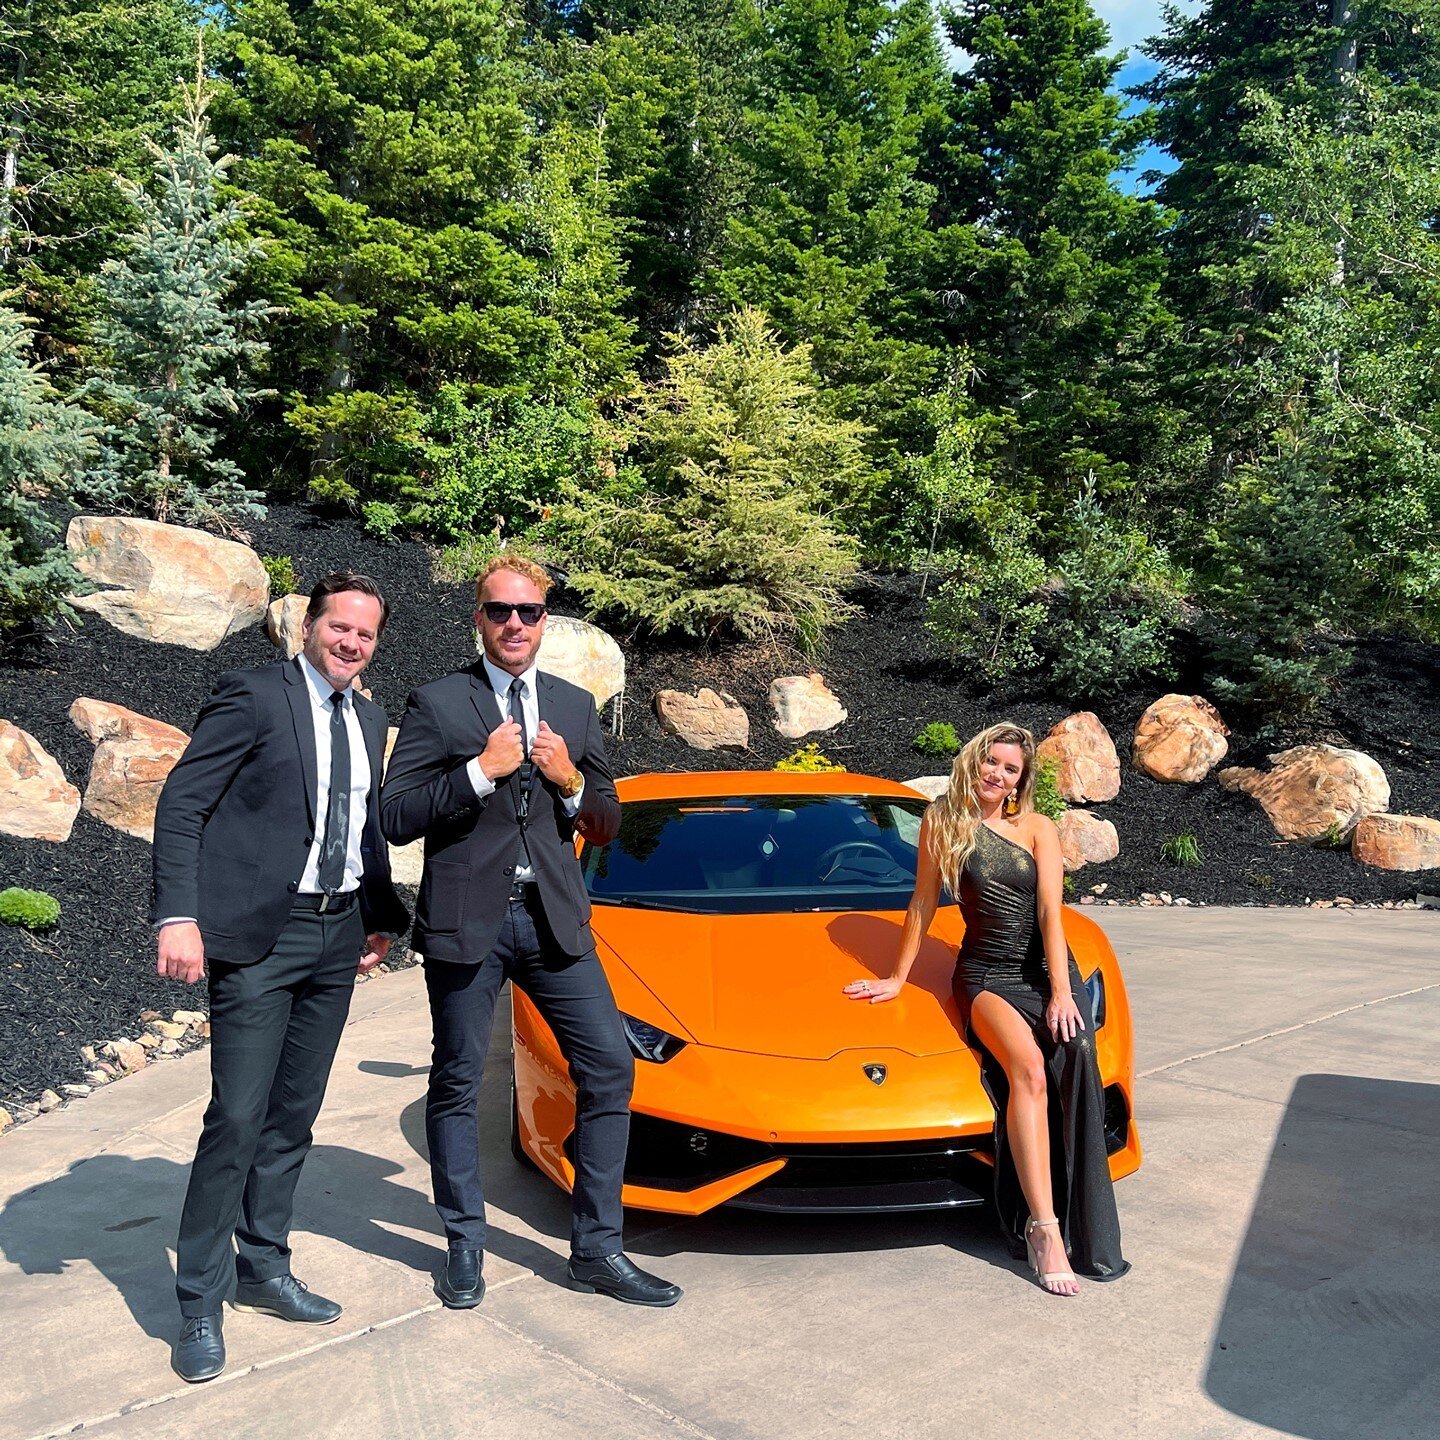 Gold Standard riding in style at @ParkCity360's Lamborghini party!